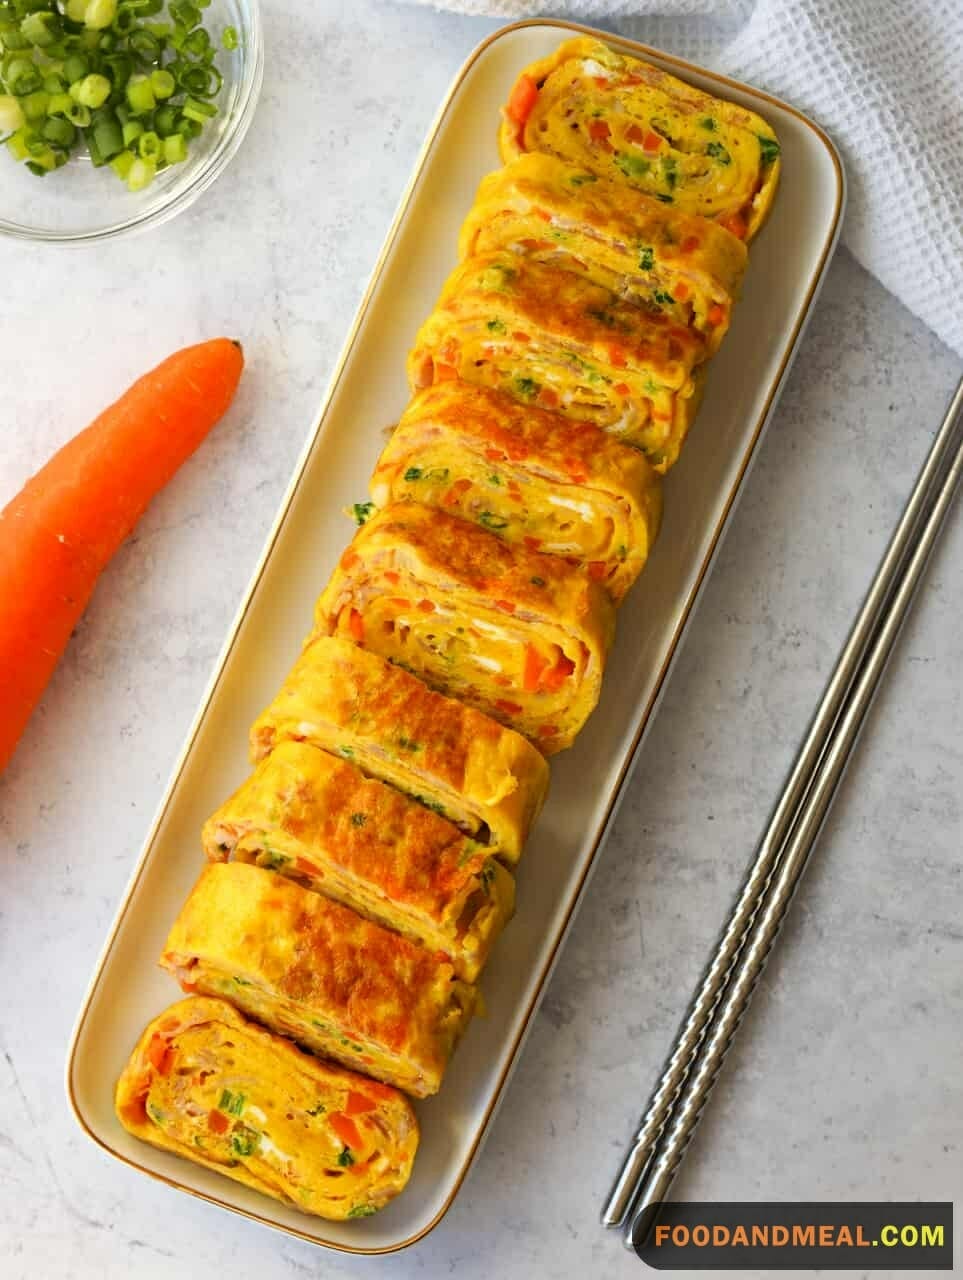 Rolled Omelet